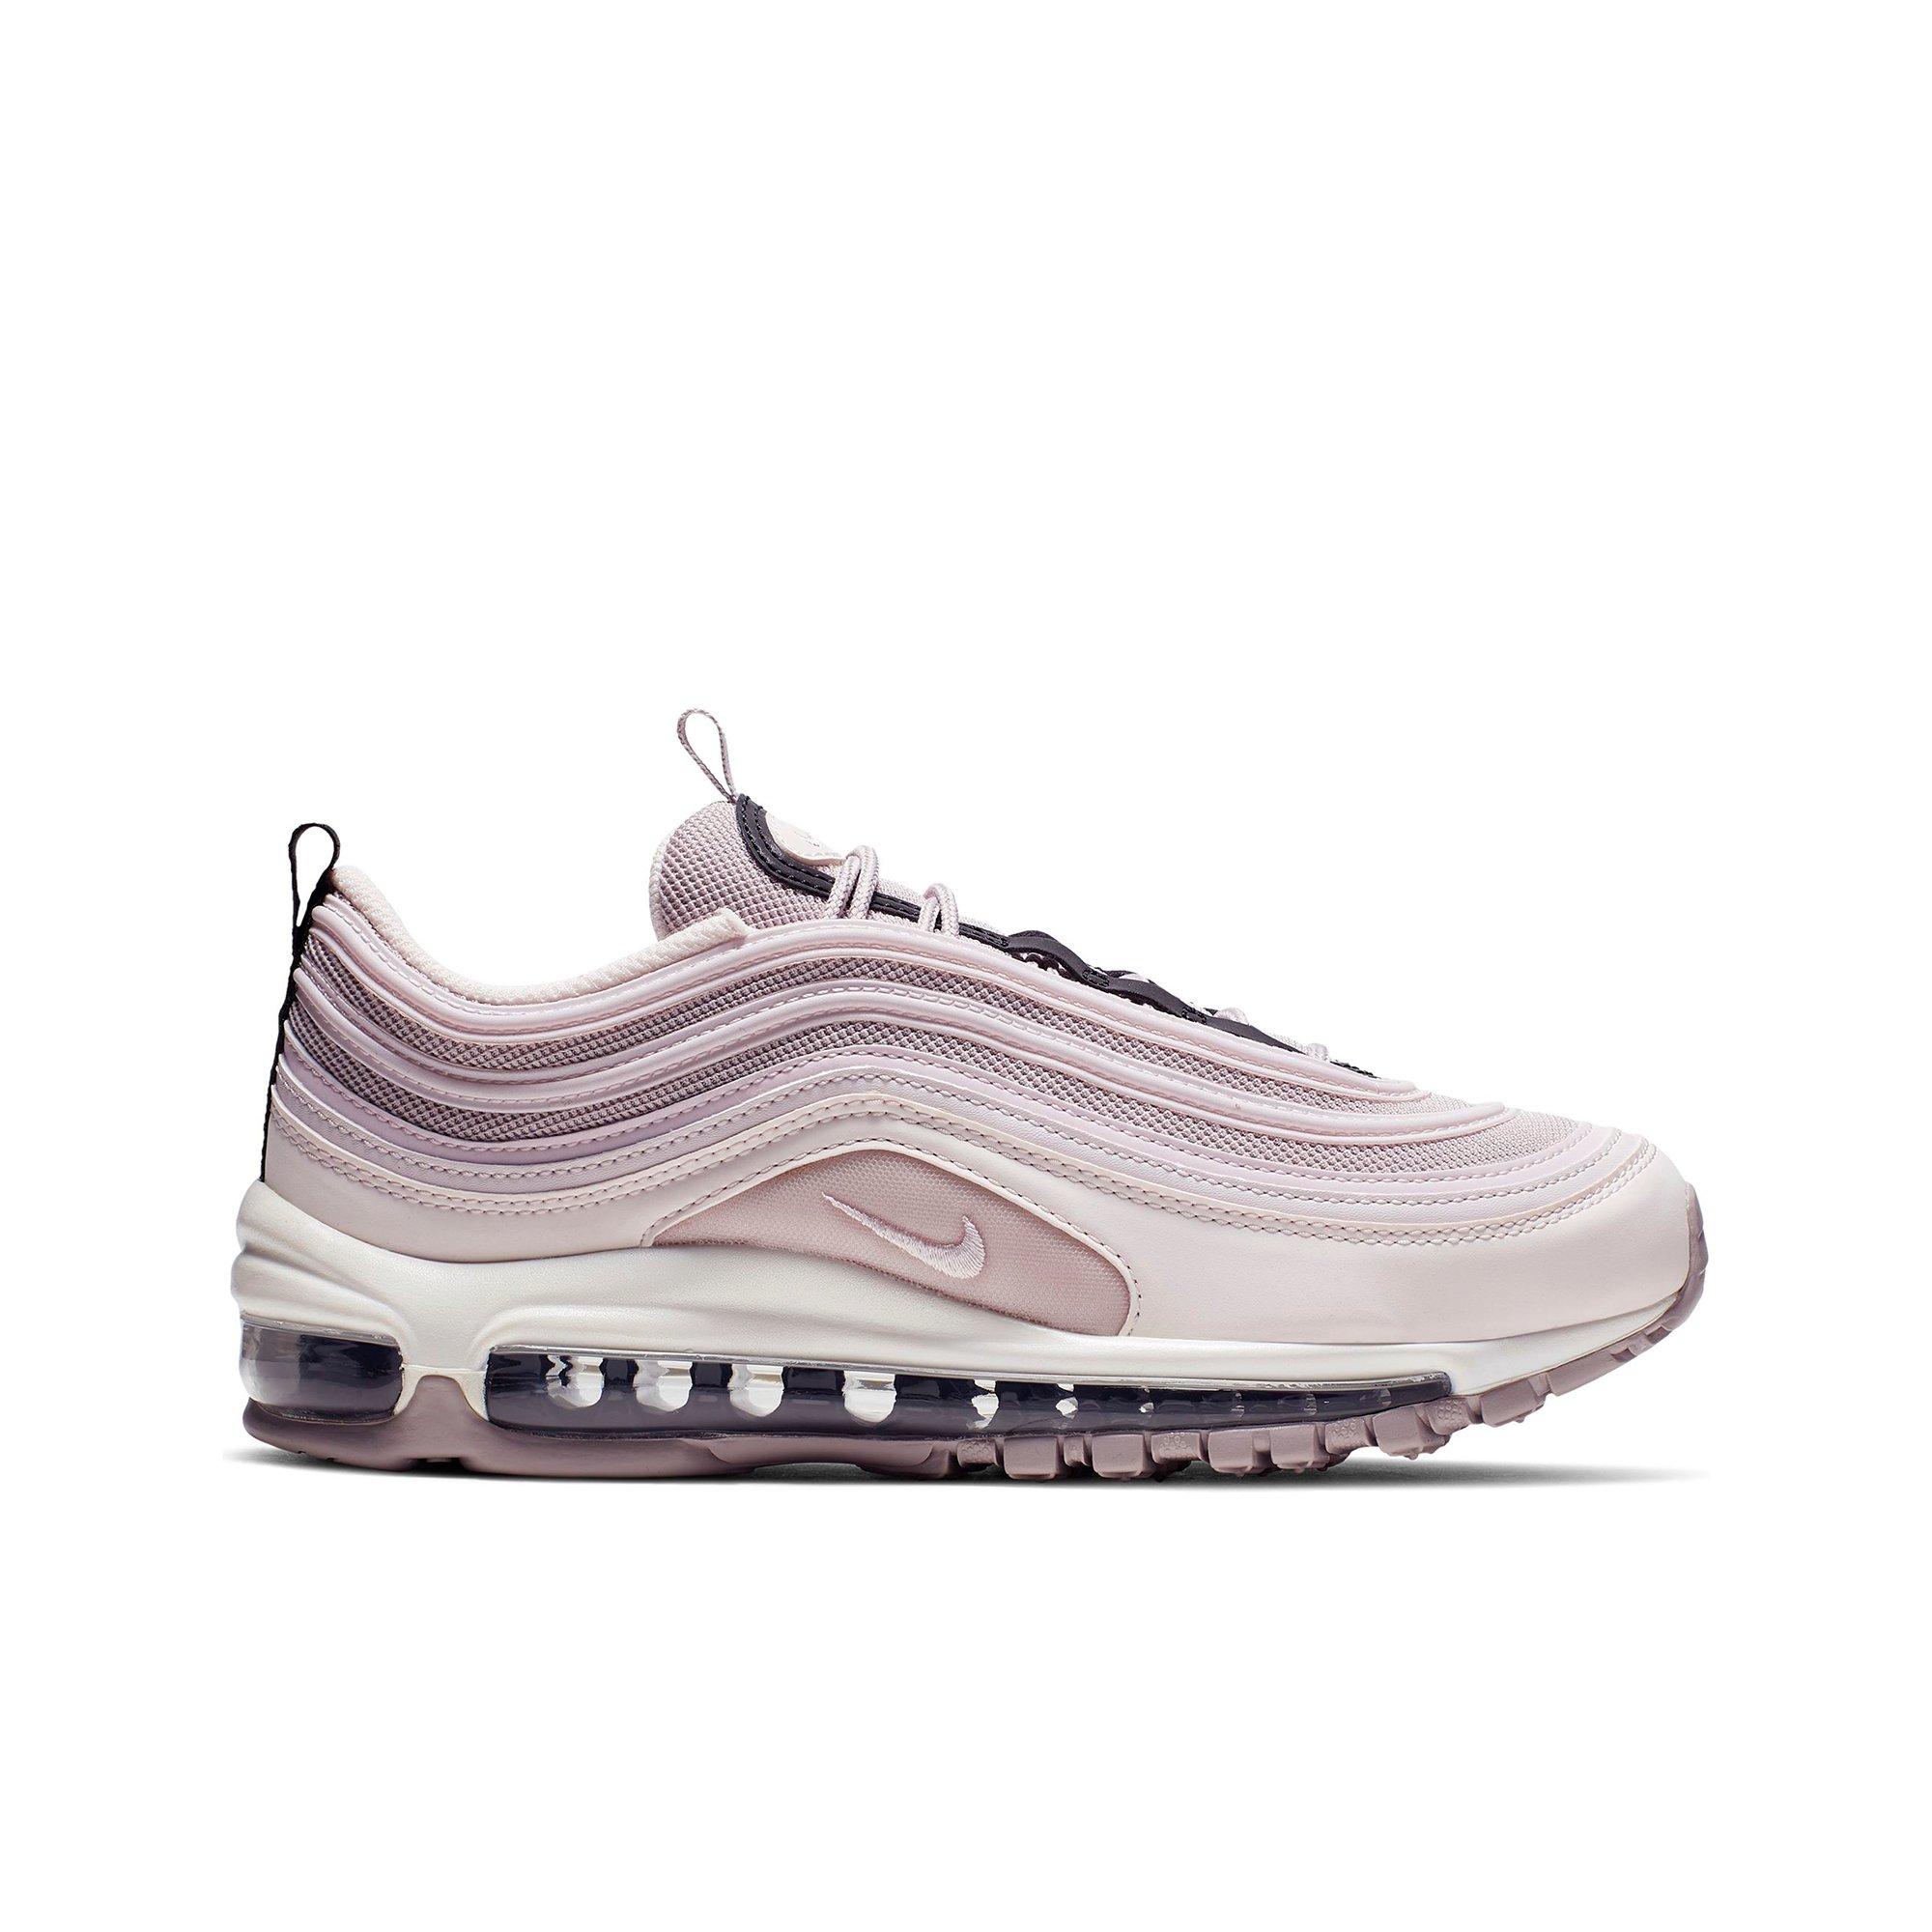 nike air max 97 trainers violet ash psychic pink lx